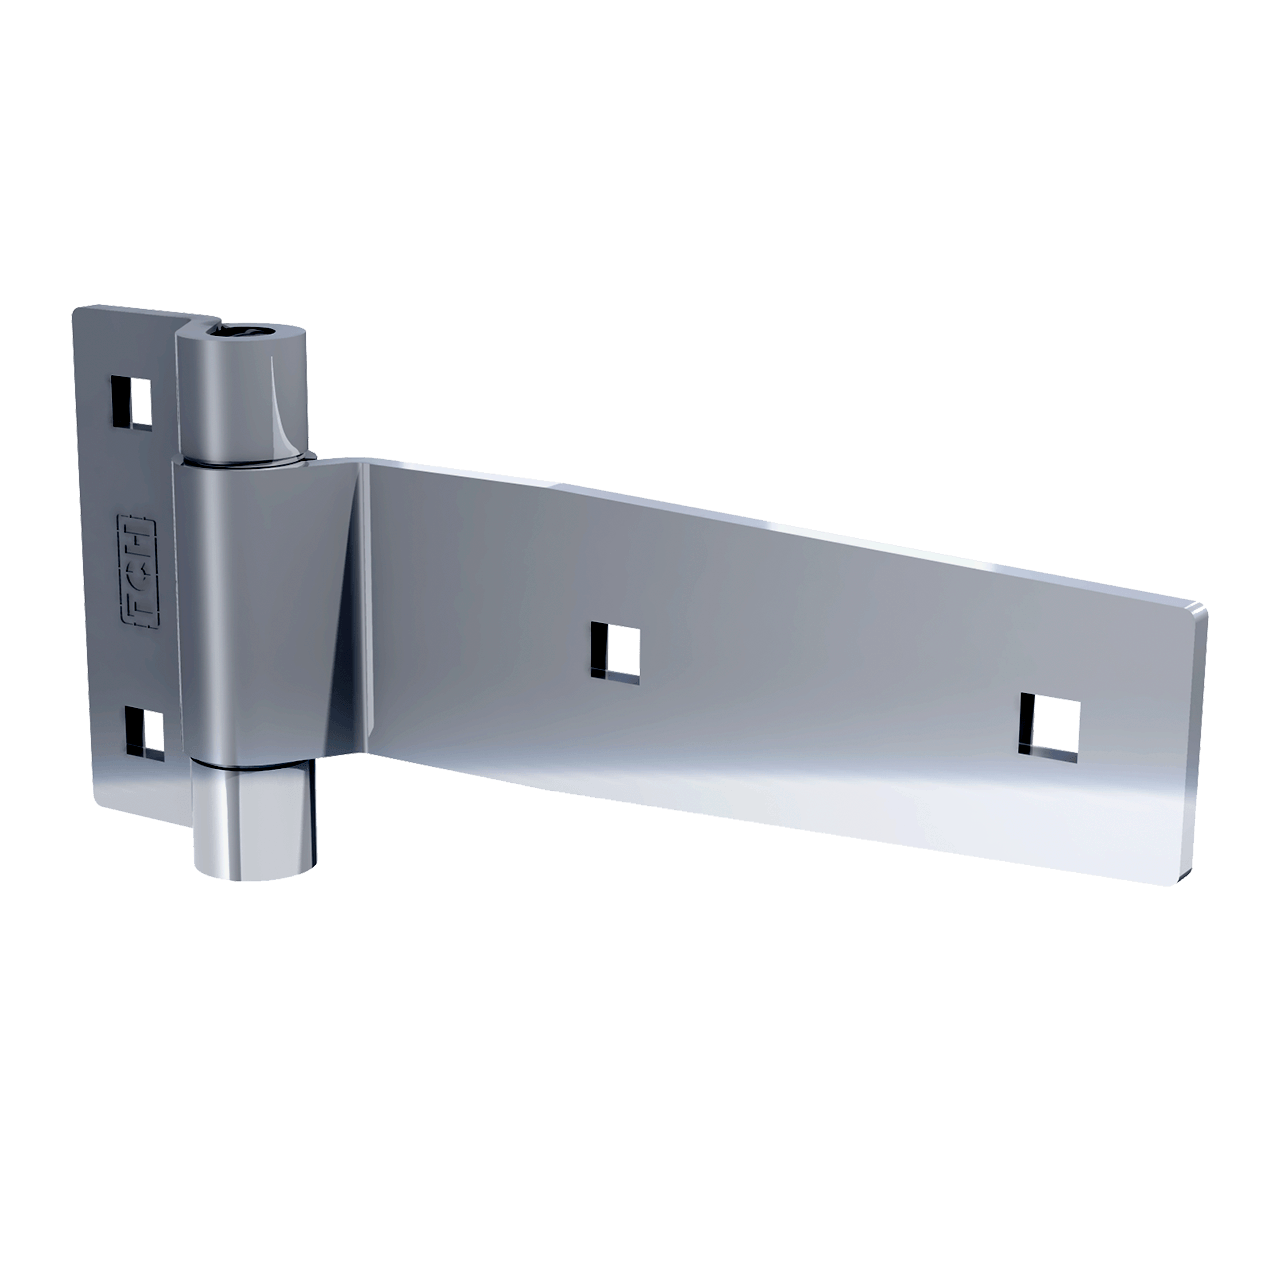 5" Polished Stainless Steel Strap Hinge, 3/4 view